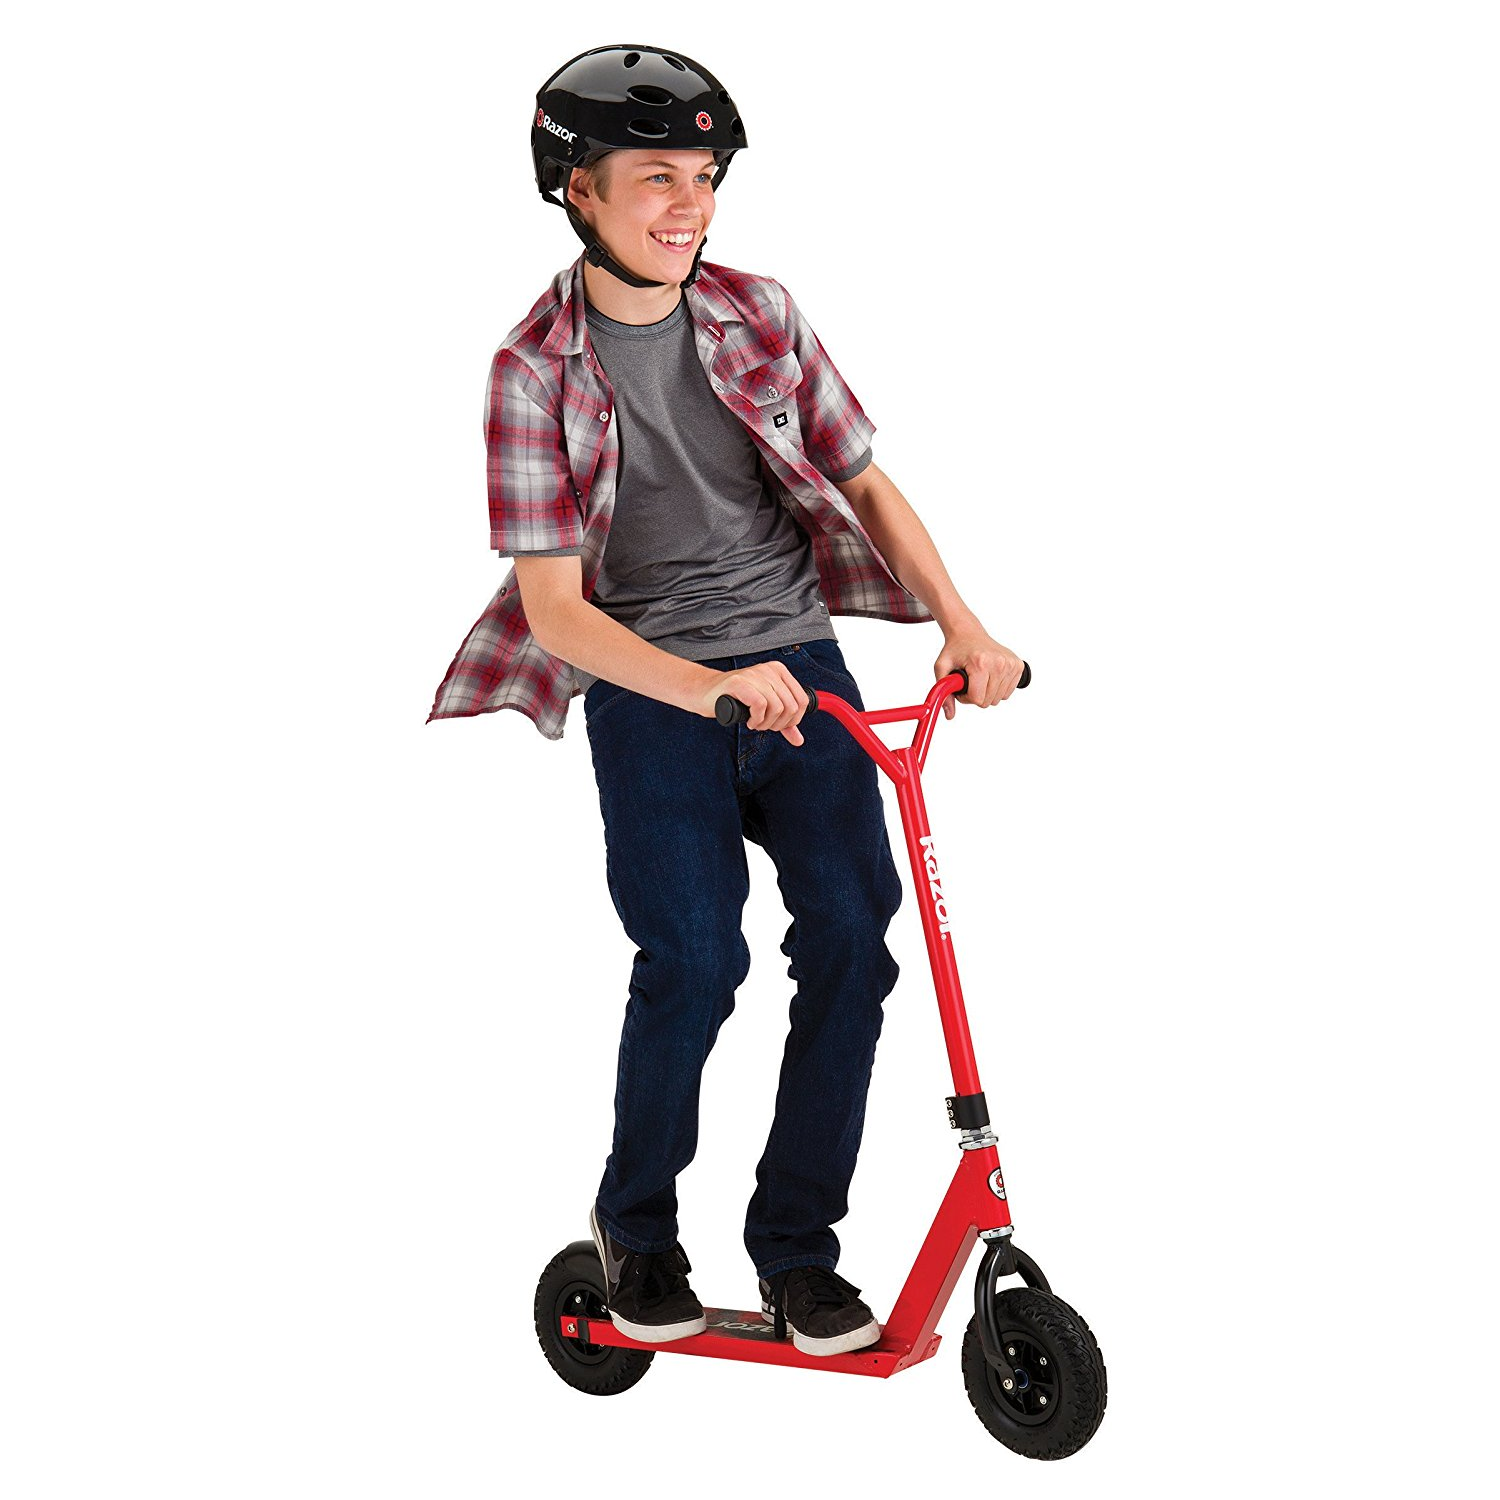 Razor Pro RDS Dirt Scooter (Red) ONLY $89.00 Shipped! Will Arrive Before Christmas!